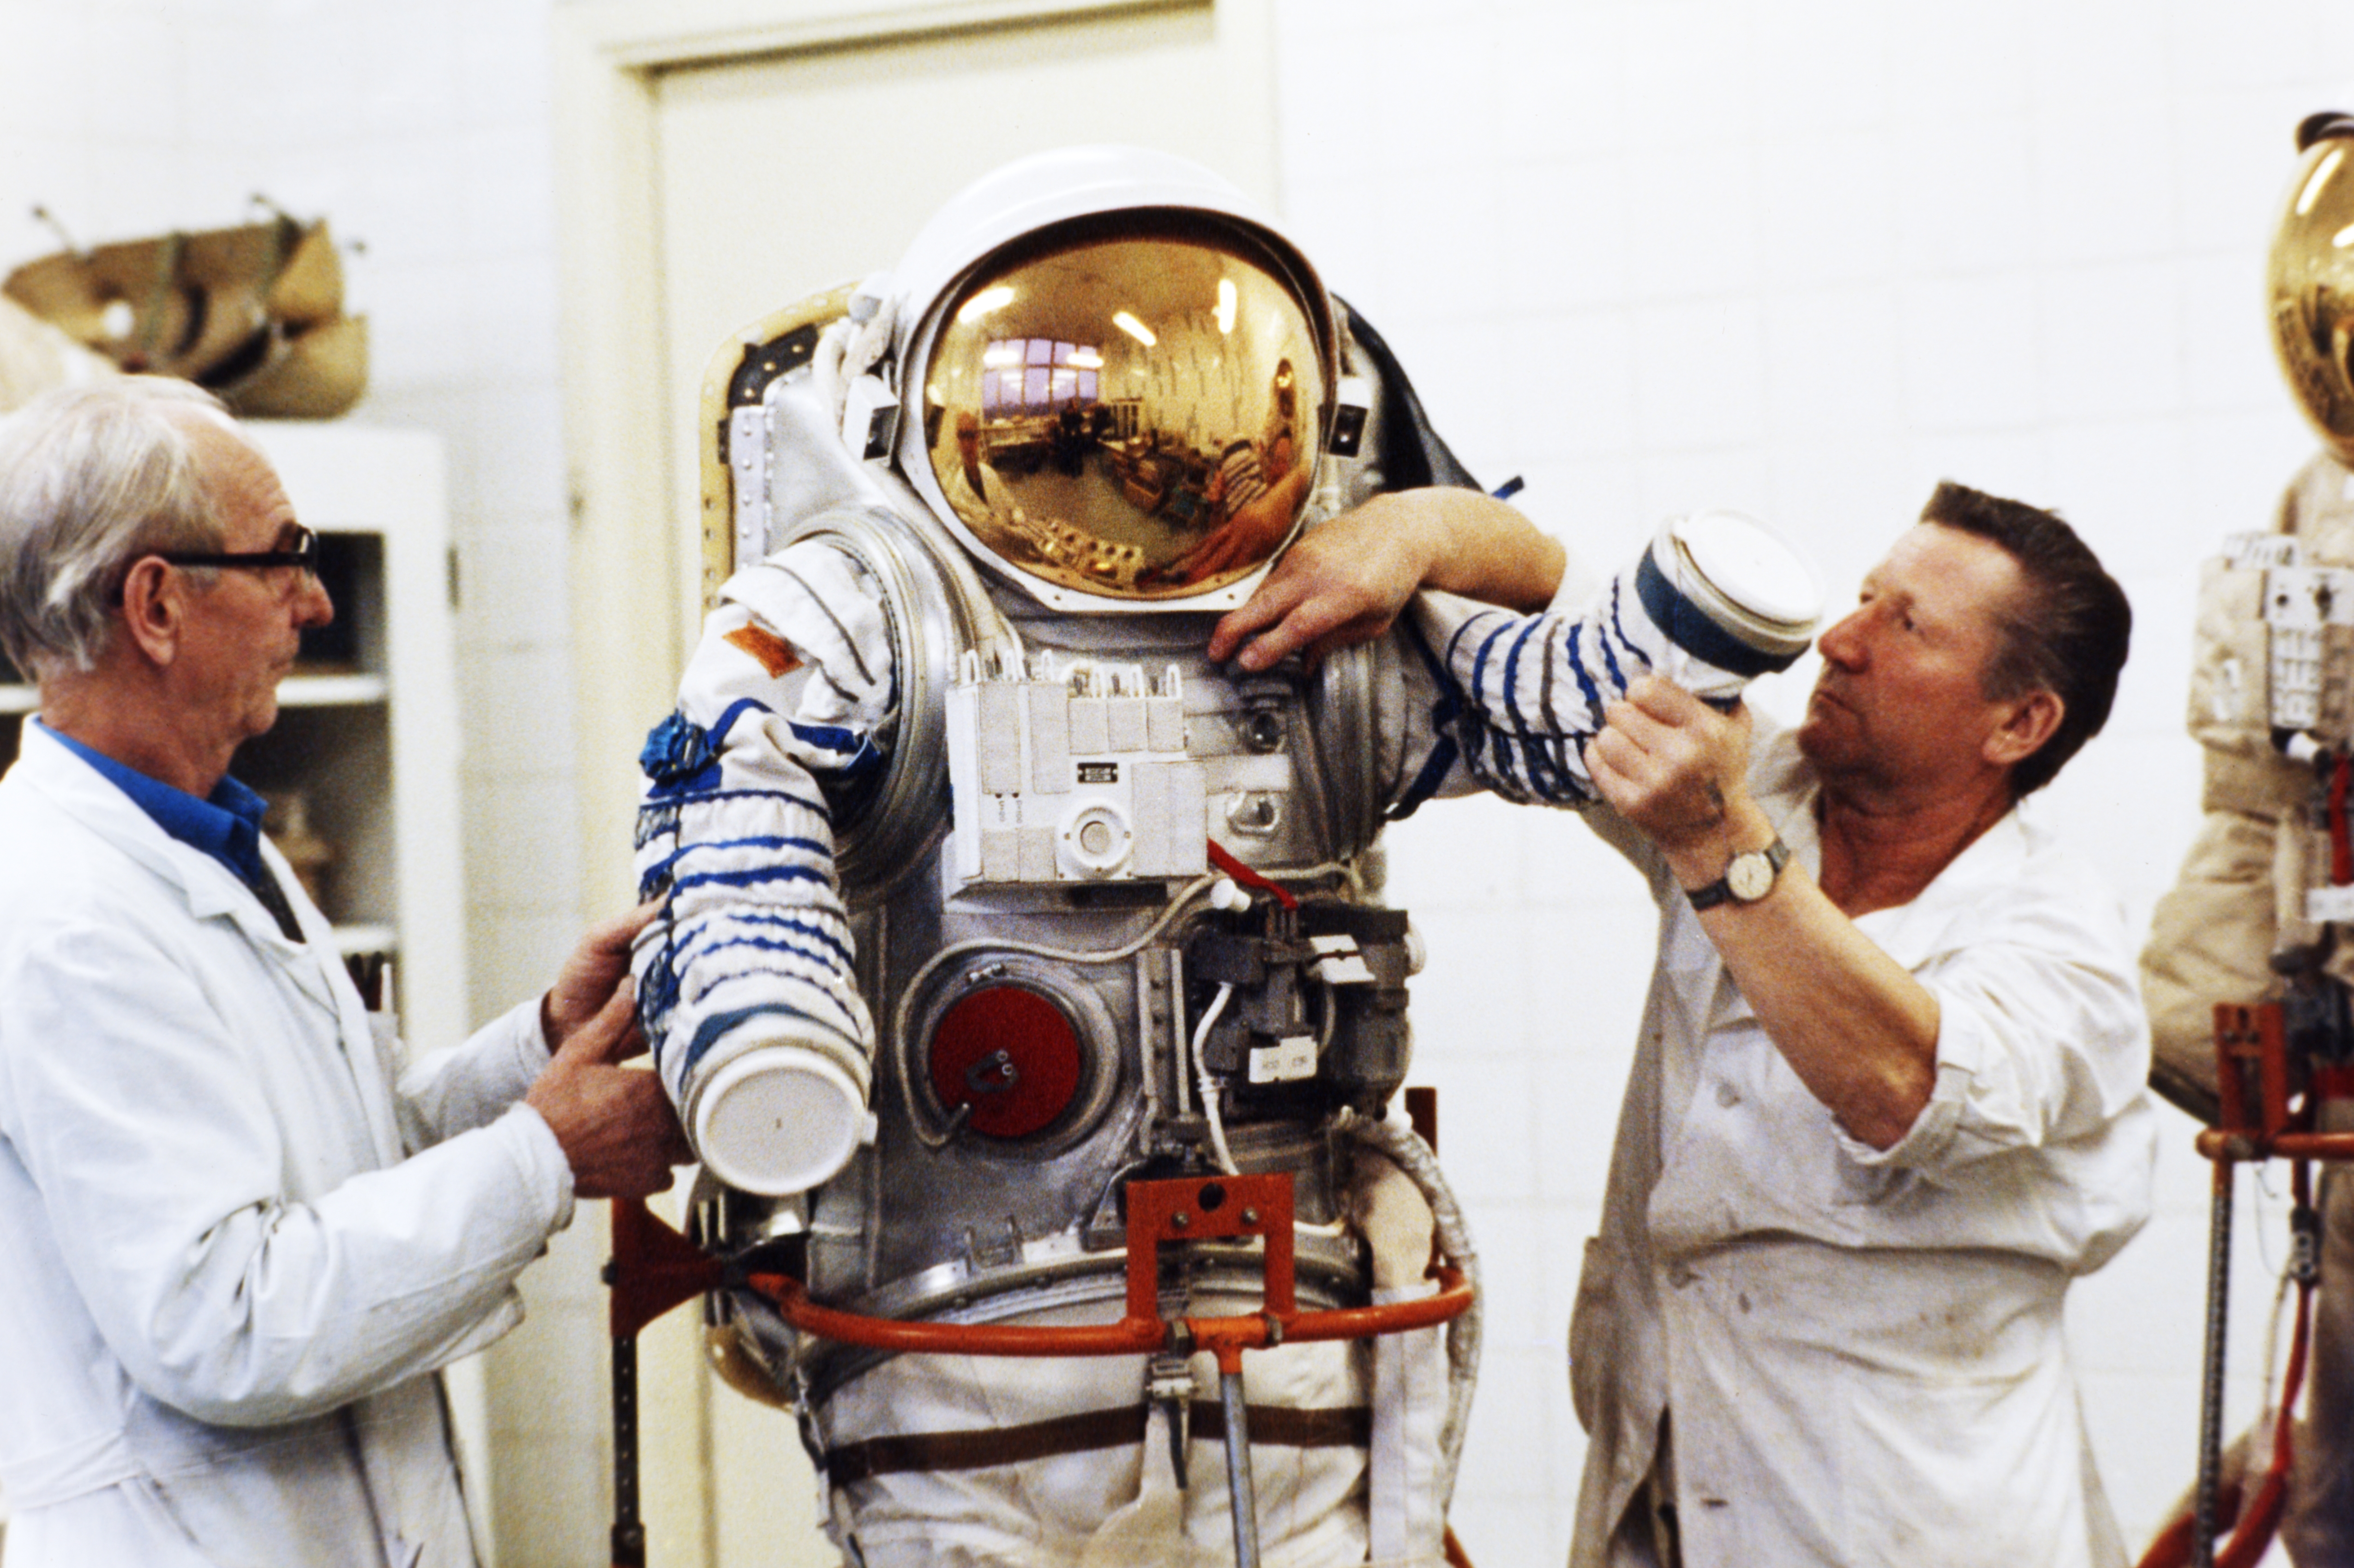 Assemblers, Ivan Volchenkov and Nikolay Petrov, at a de-classified aerospace facility with one of several newly designed spacesuits to be delivered to the mir space station in 1992.